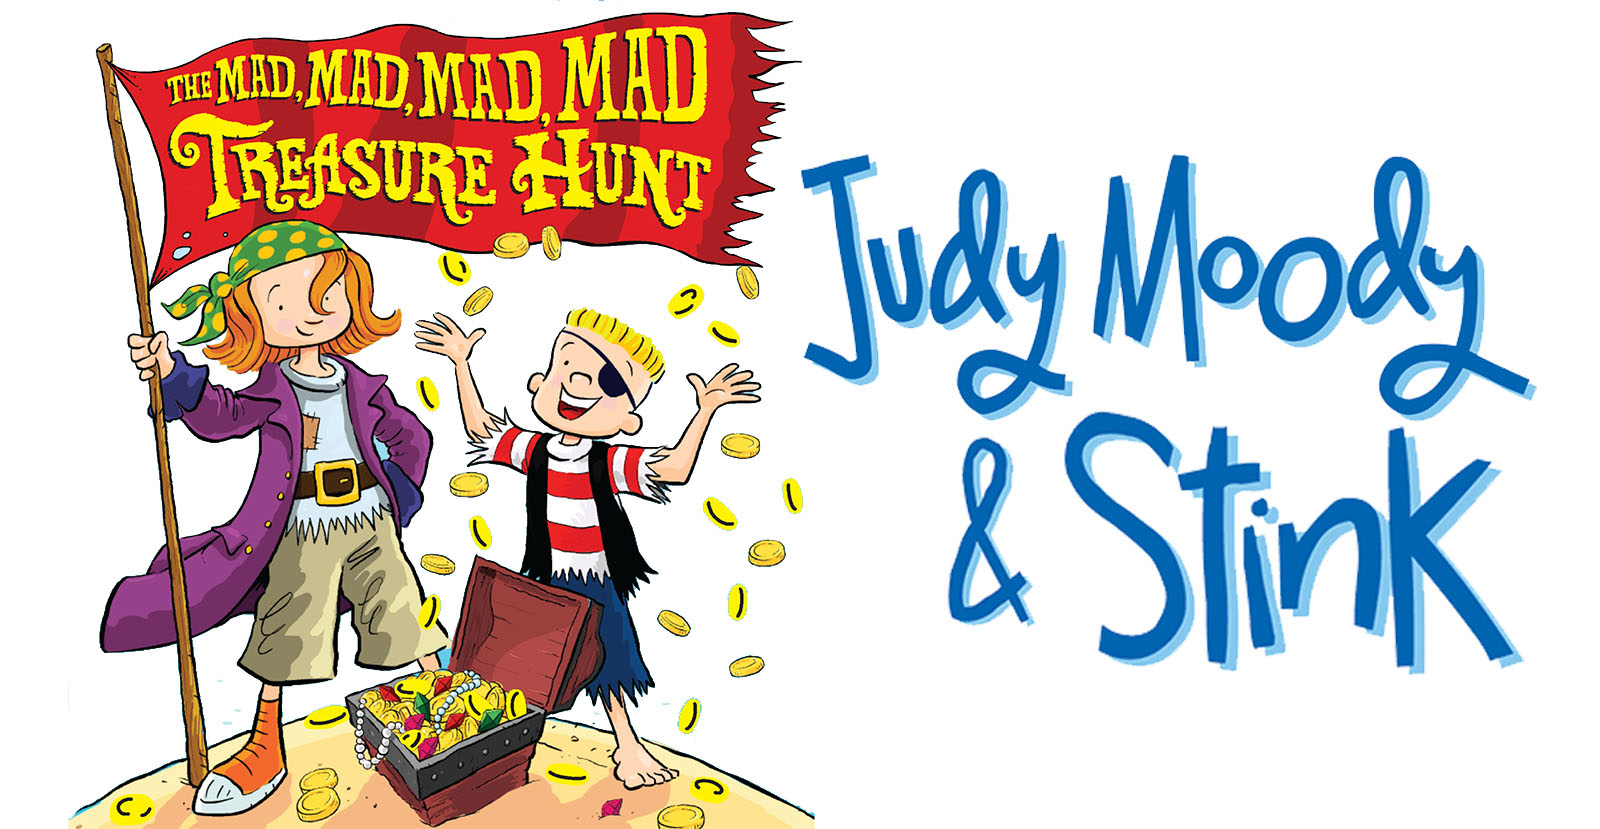 Judy Moody & Stink: The Mad, Mad, Mad, Mad Treasure Hunt | The Rose Theater